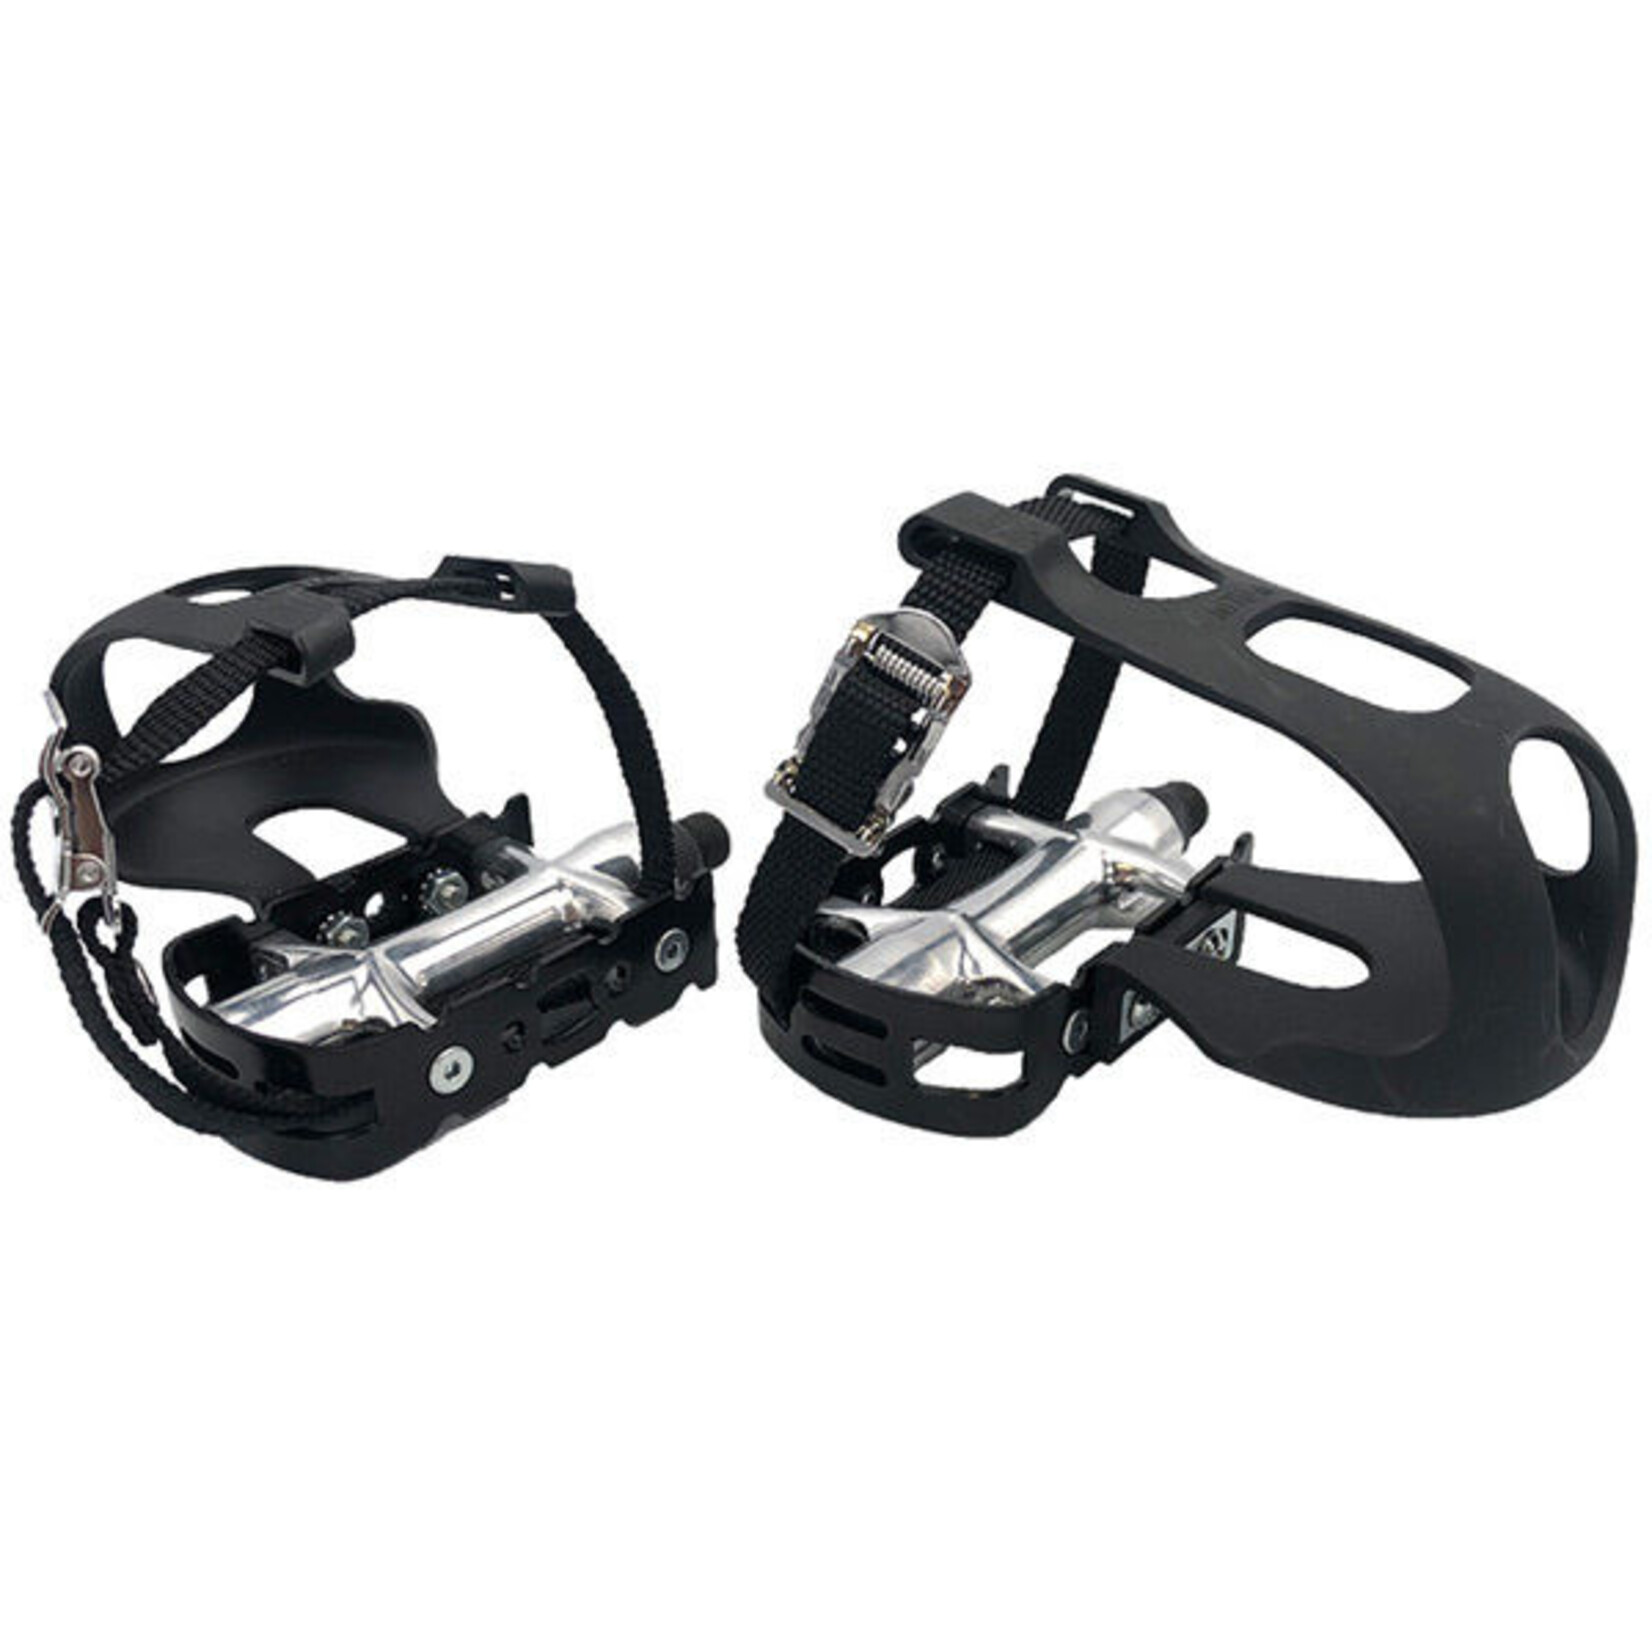 M Part M Part AlloyPedals including toe Clips and Straps 9/16